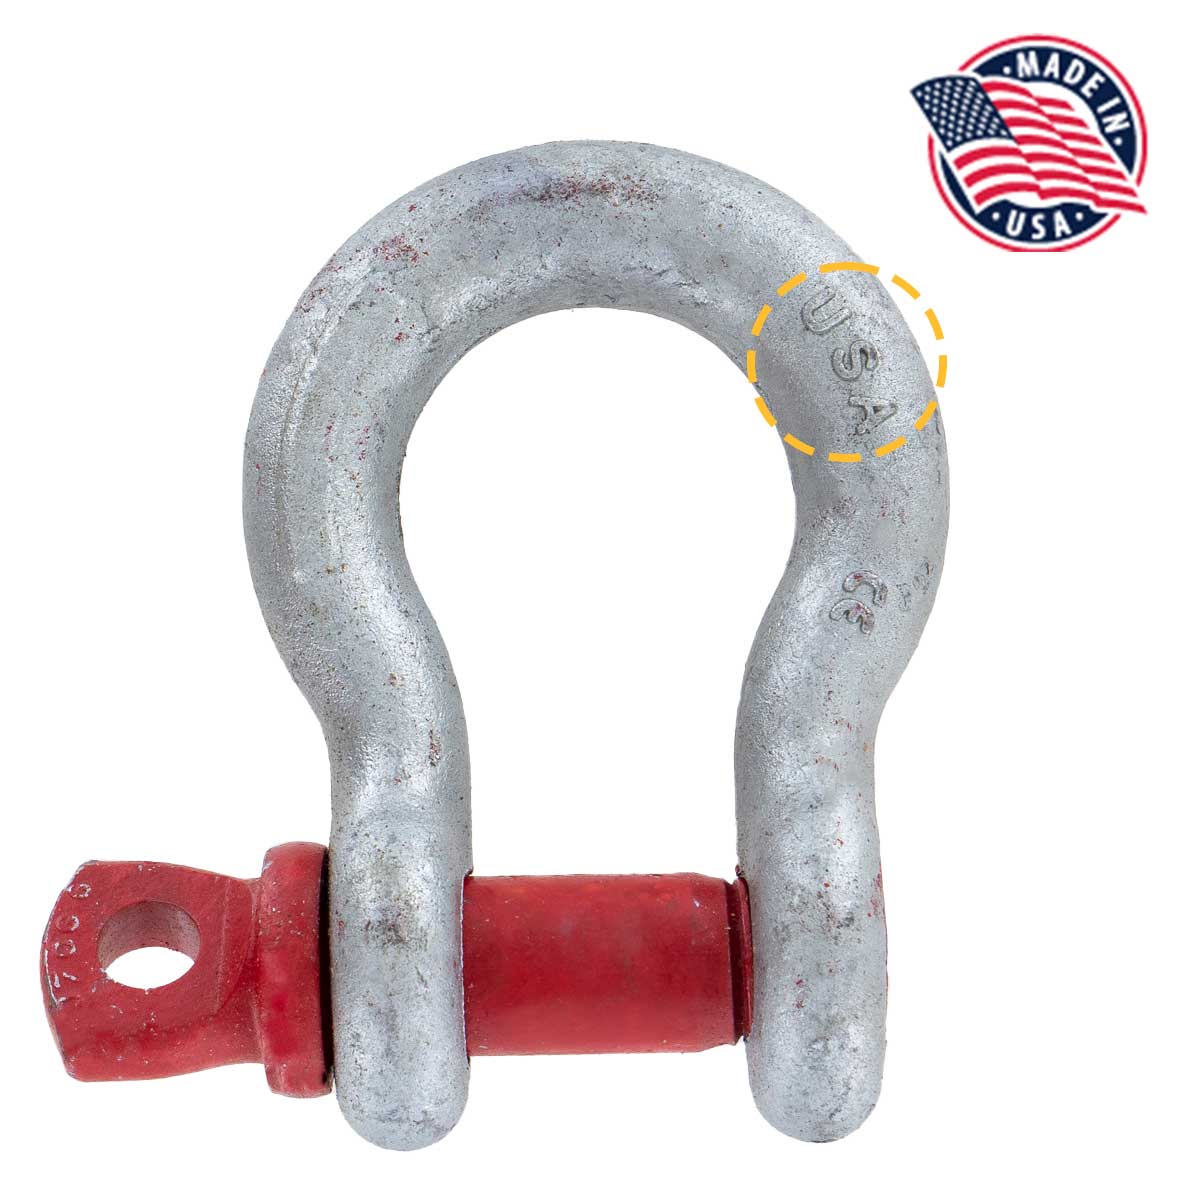 1-3/4" Crosby® Screw Pin Anchor Shackle | G-209 - 25 Ton made in USA